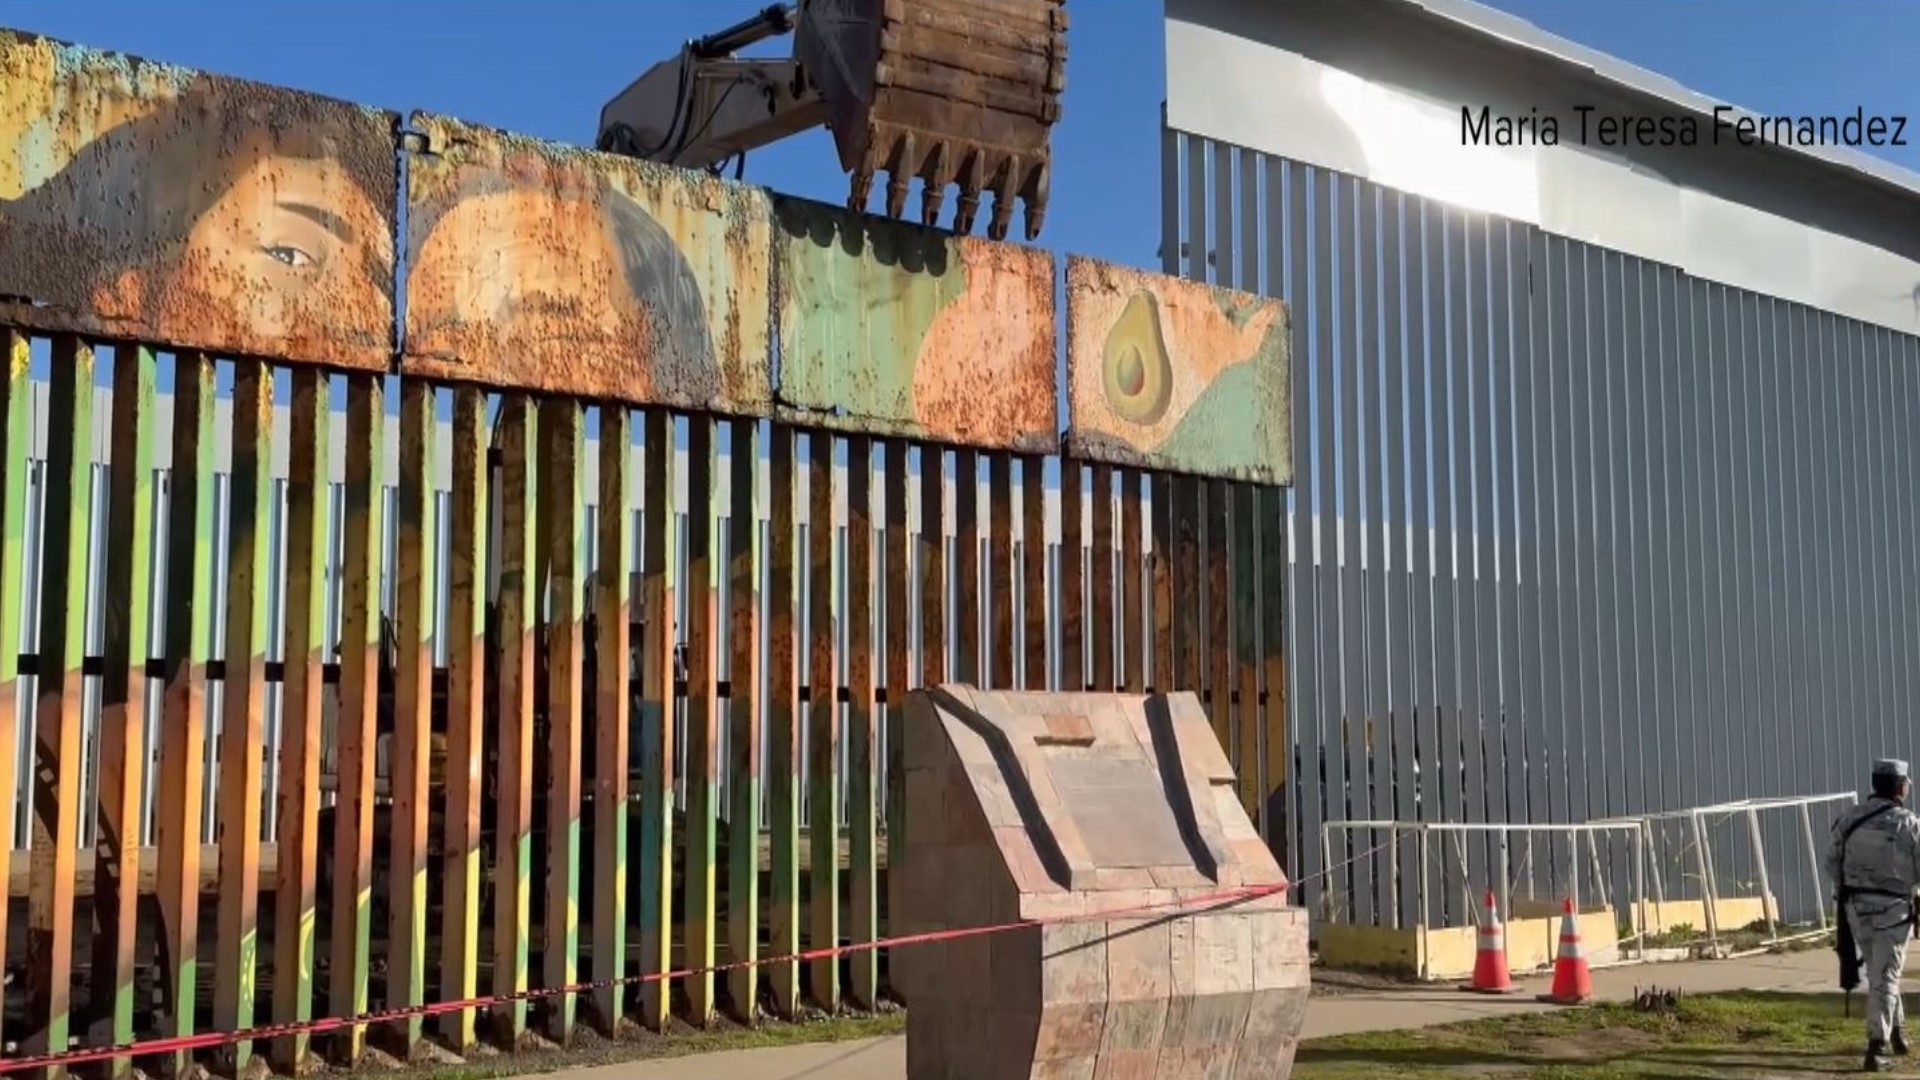 A local community advisory council will decide where sections of the border wall will be showcased.